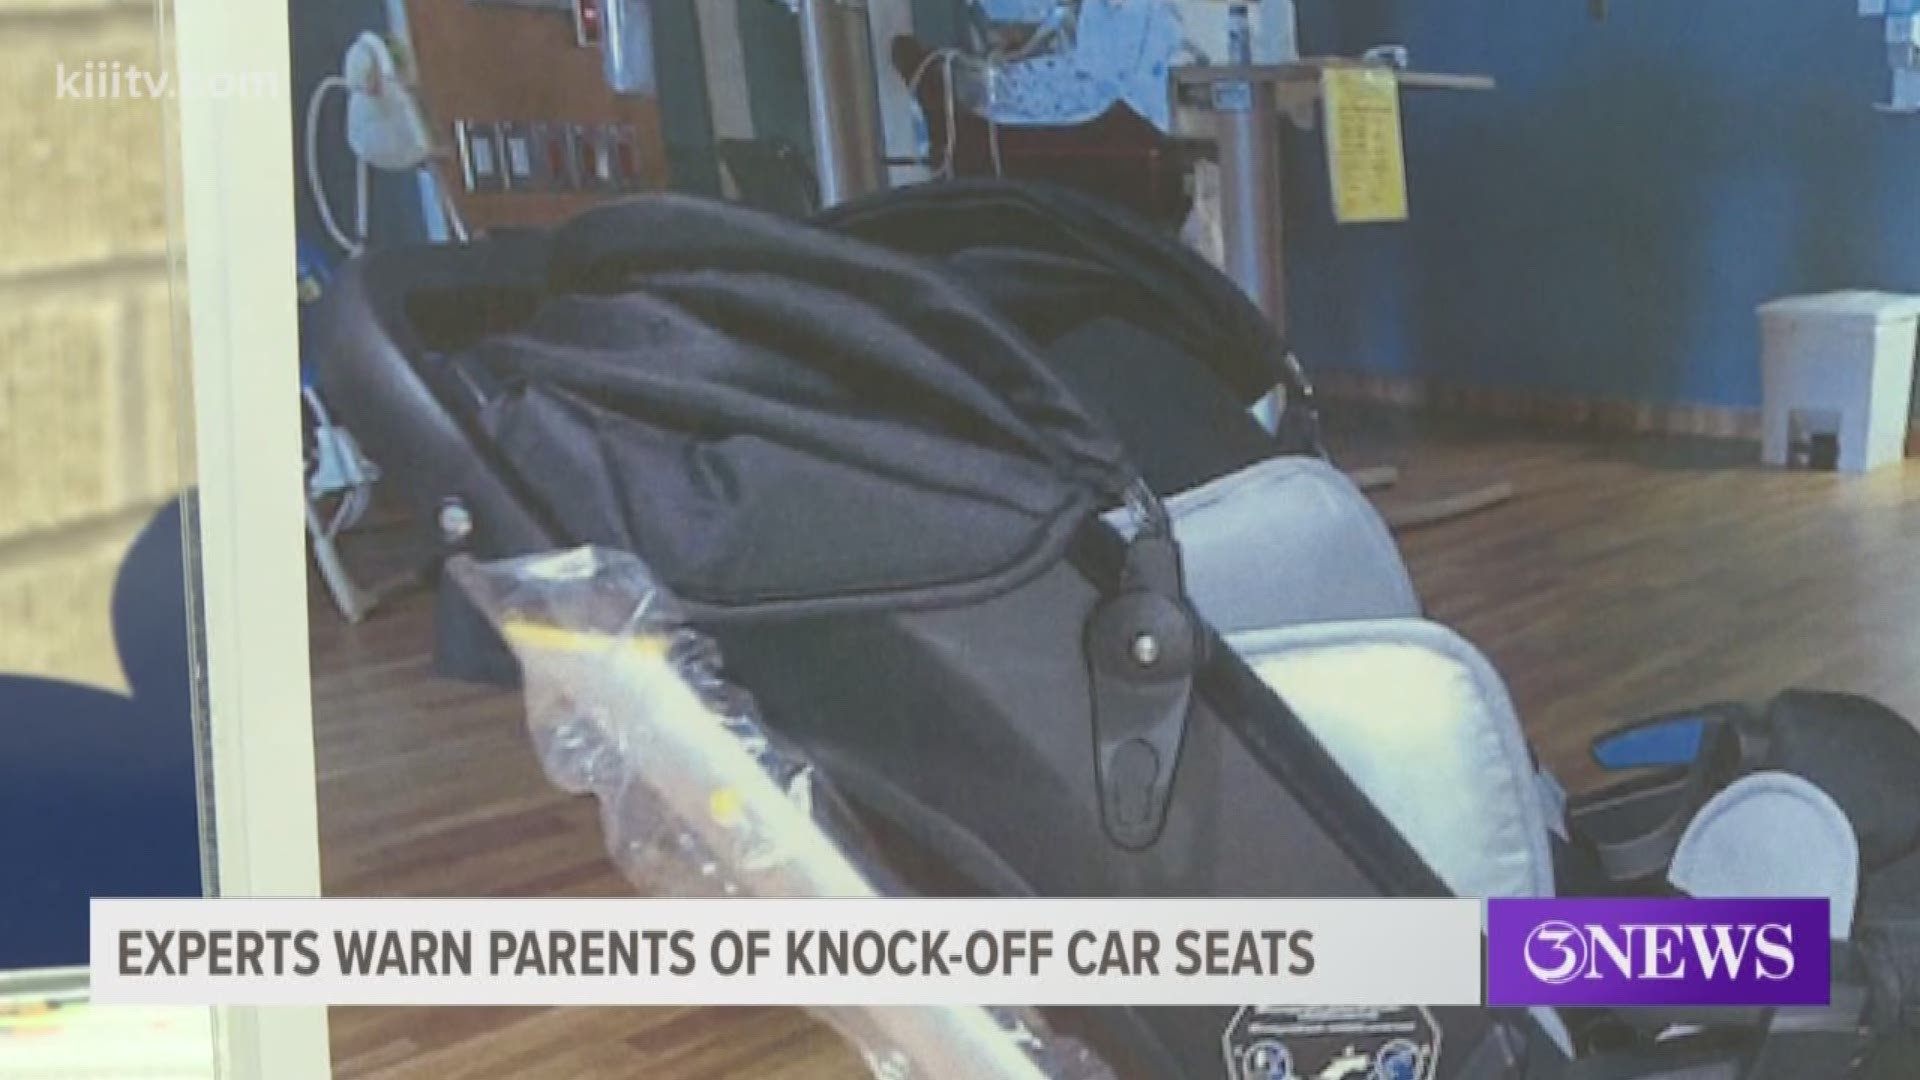 We have all heard of knock offs when it comes to designer purses, watches, things like that -- but what about children's car seats? According to one expert, it's is a thing.